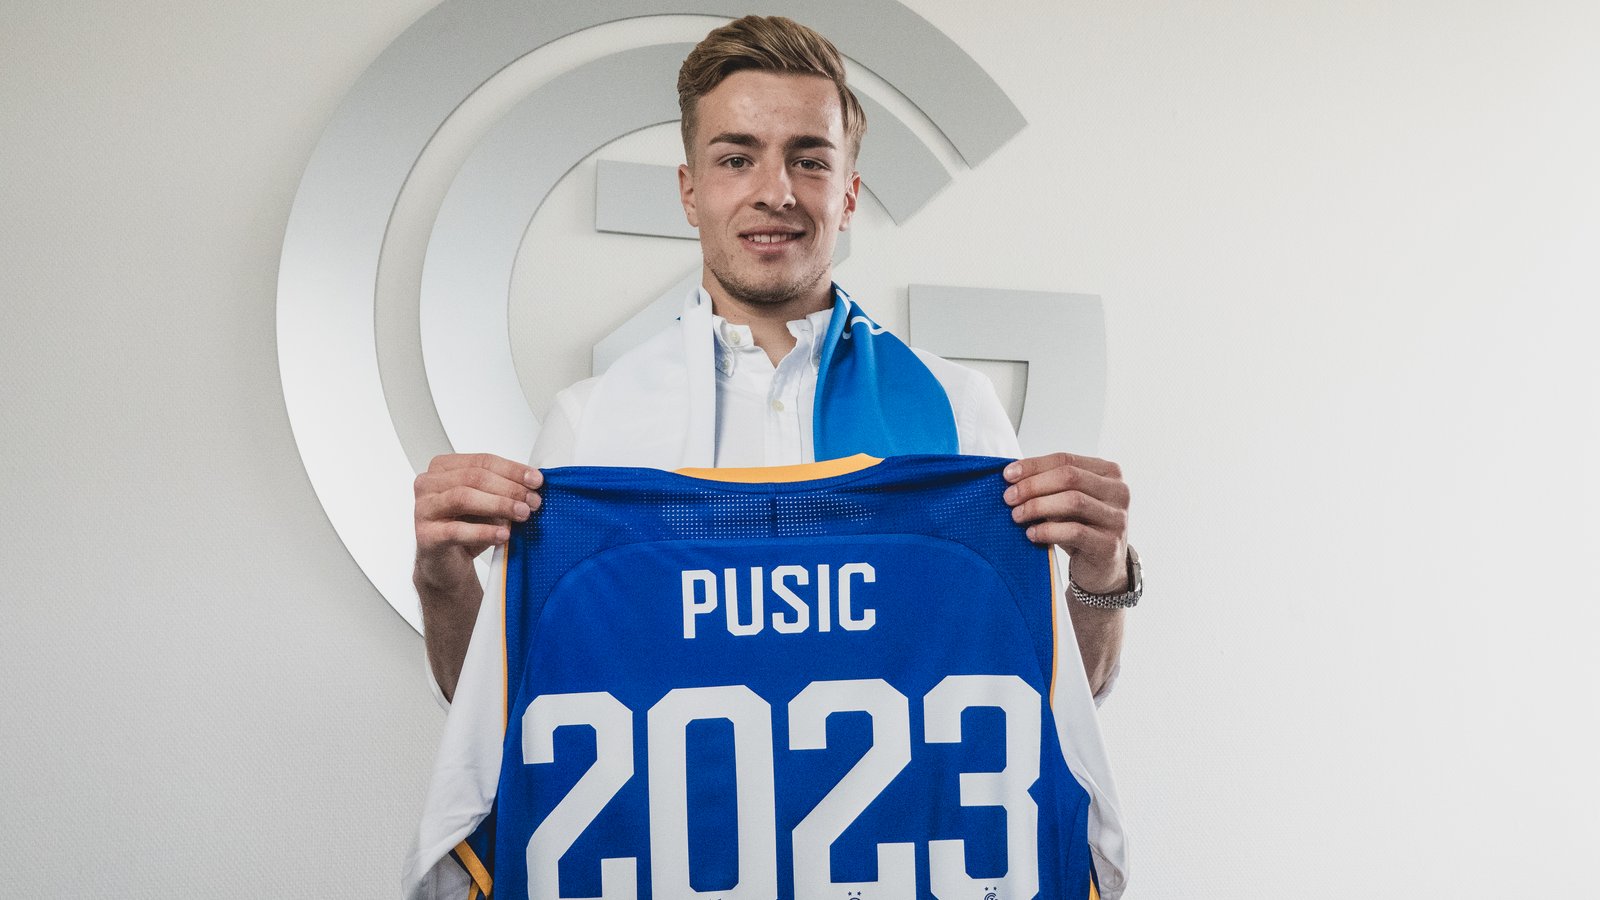 PUSIC EXTENDS CONTRACT UNTIL 2023